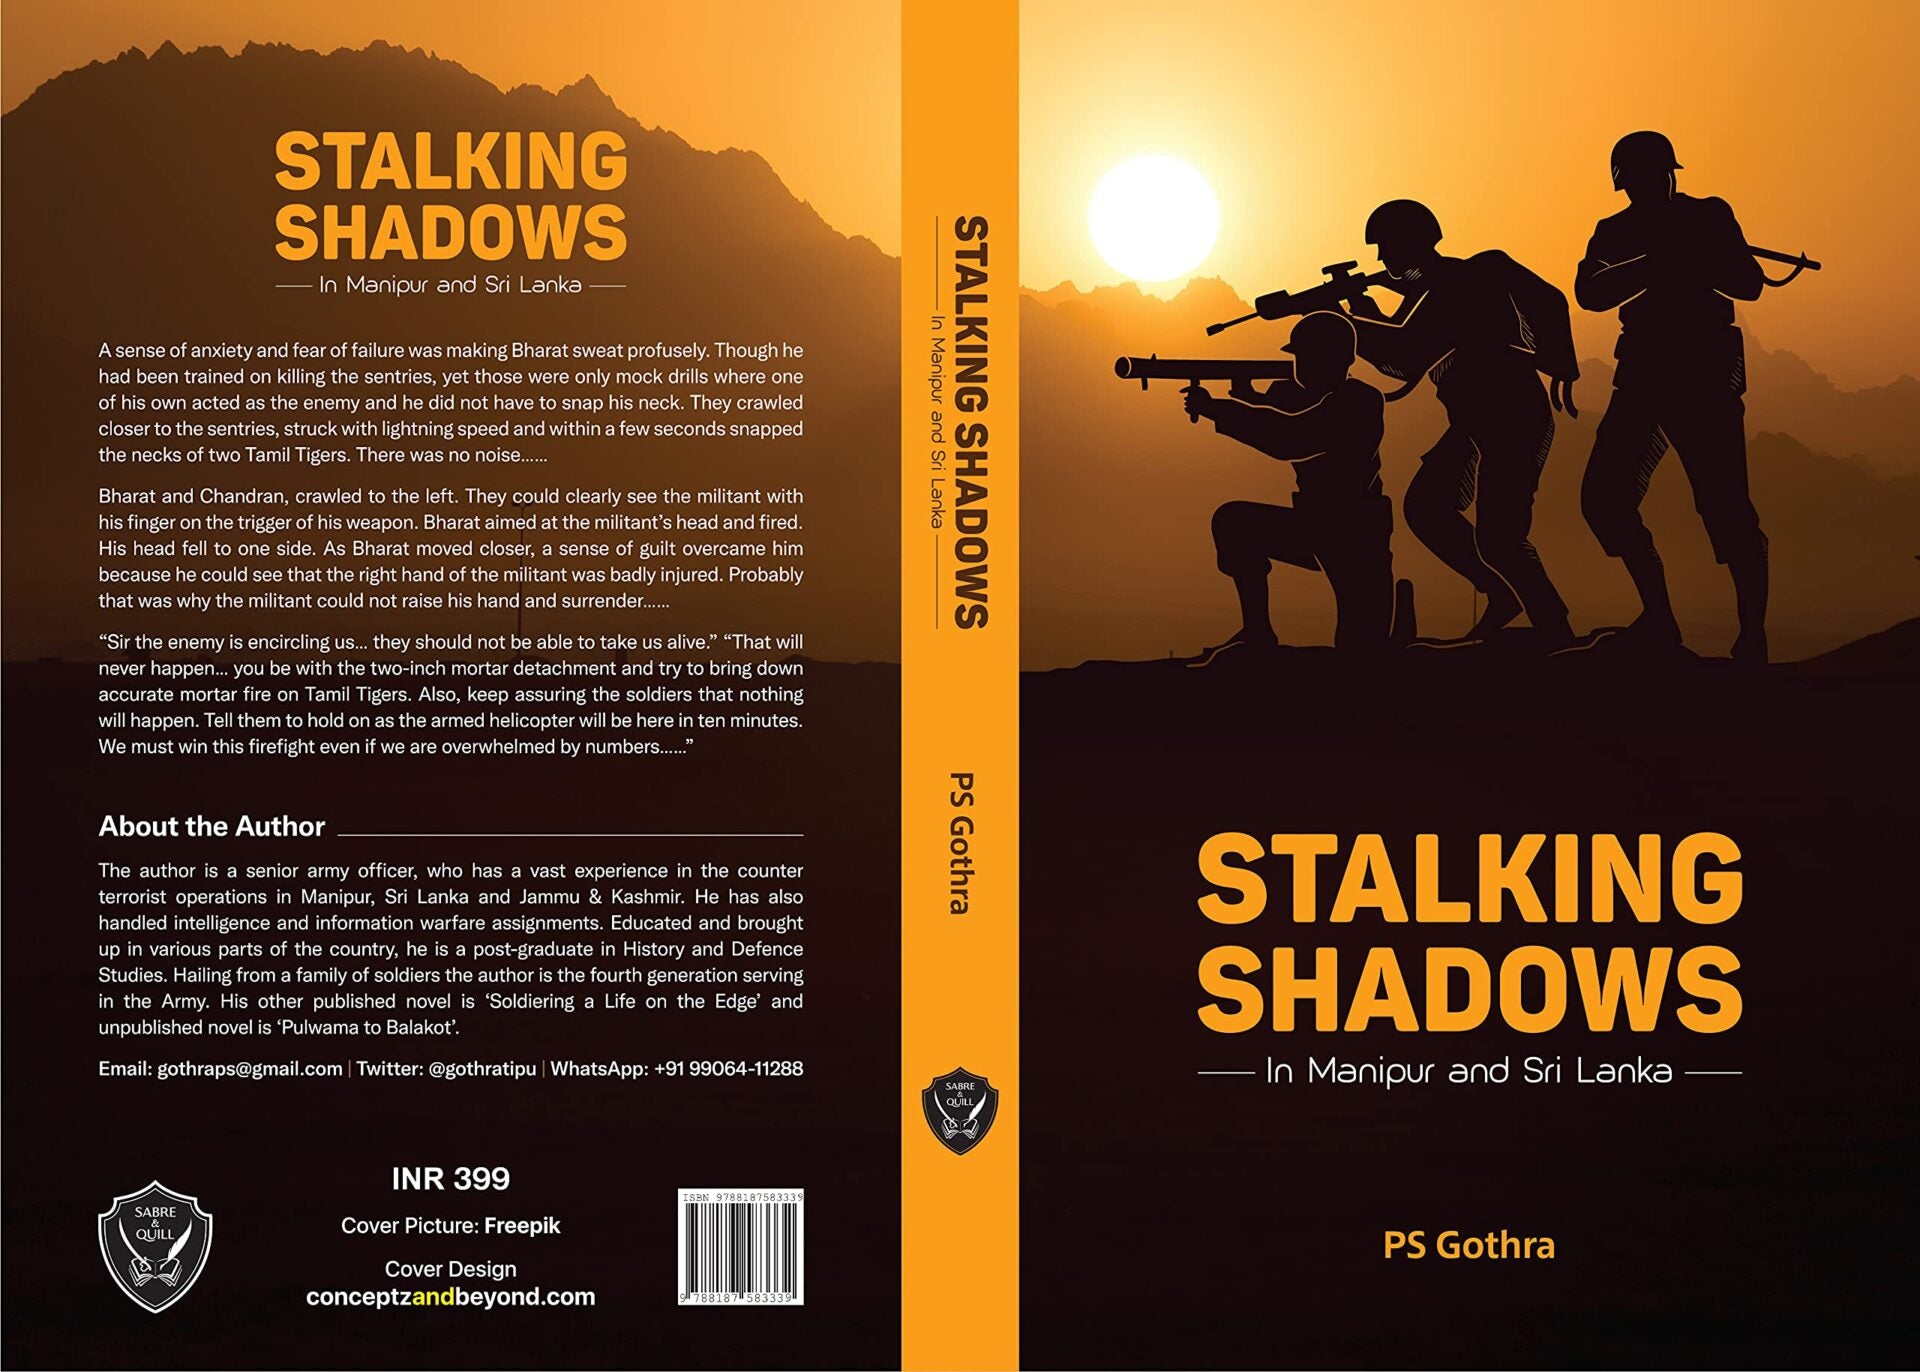 Stalking Shadows in Manipur and Sri Lanka by  PS Gothra - deltatacstore